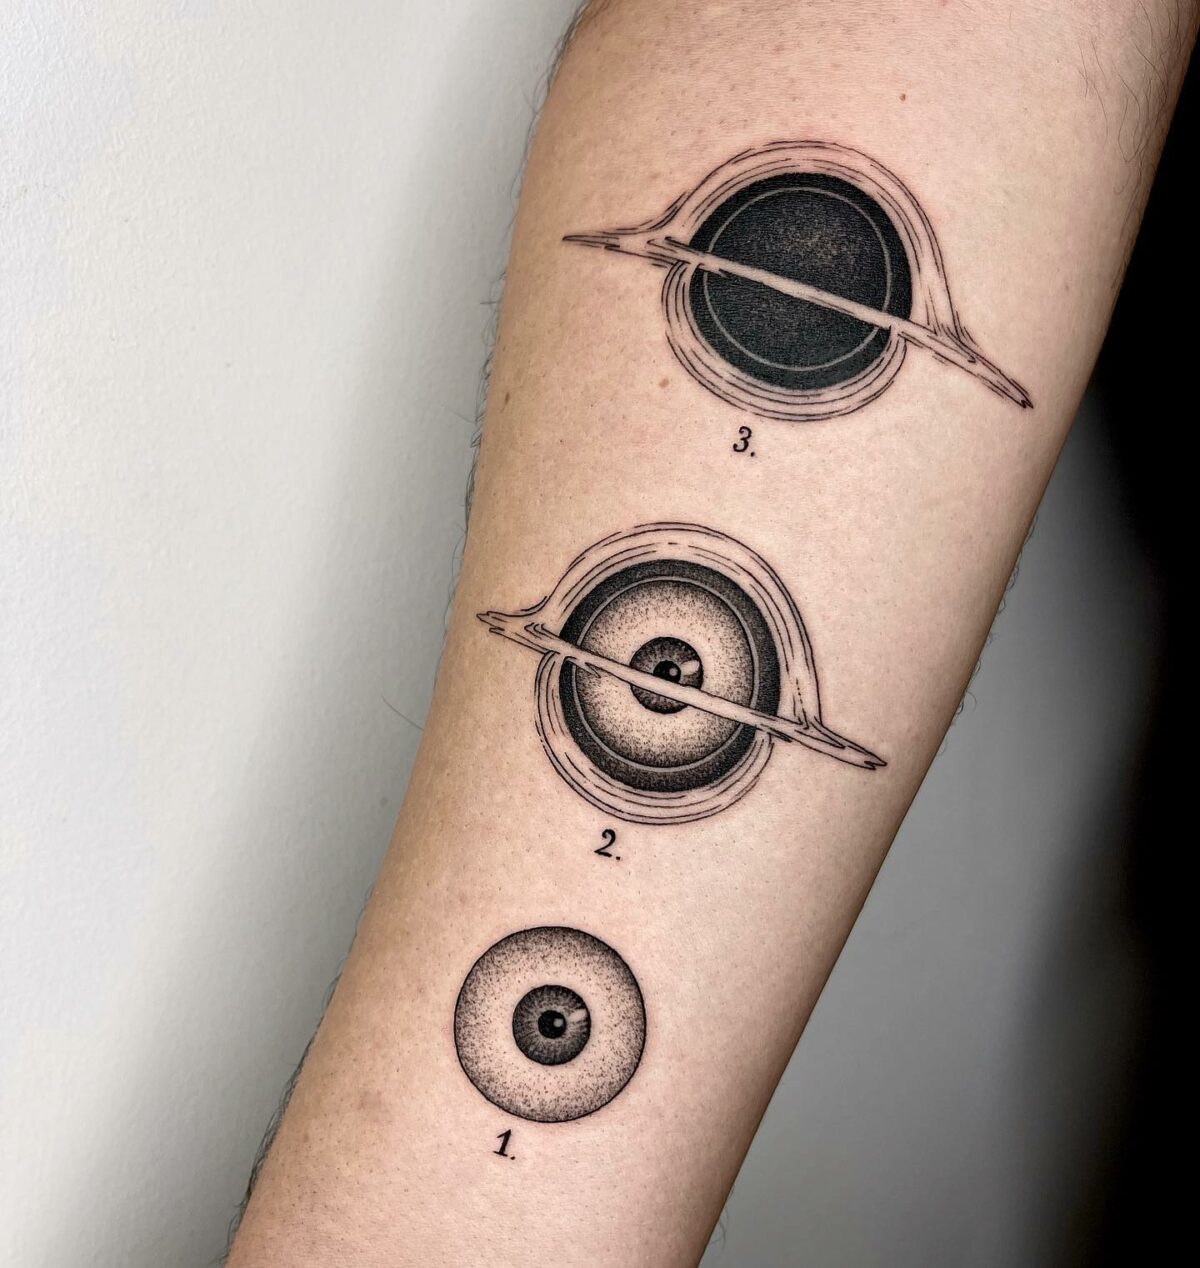 Whimsical vintage science book-inspired tattoos by Michele Volpi —  Visualflood Magazine